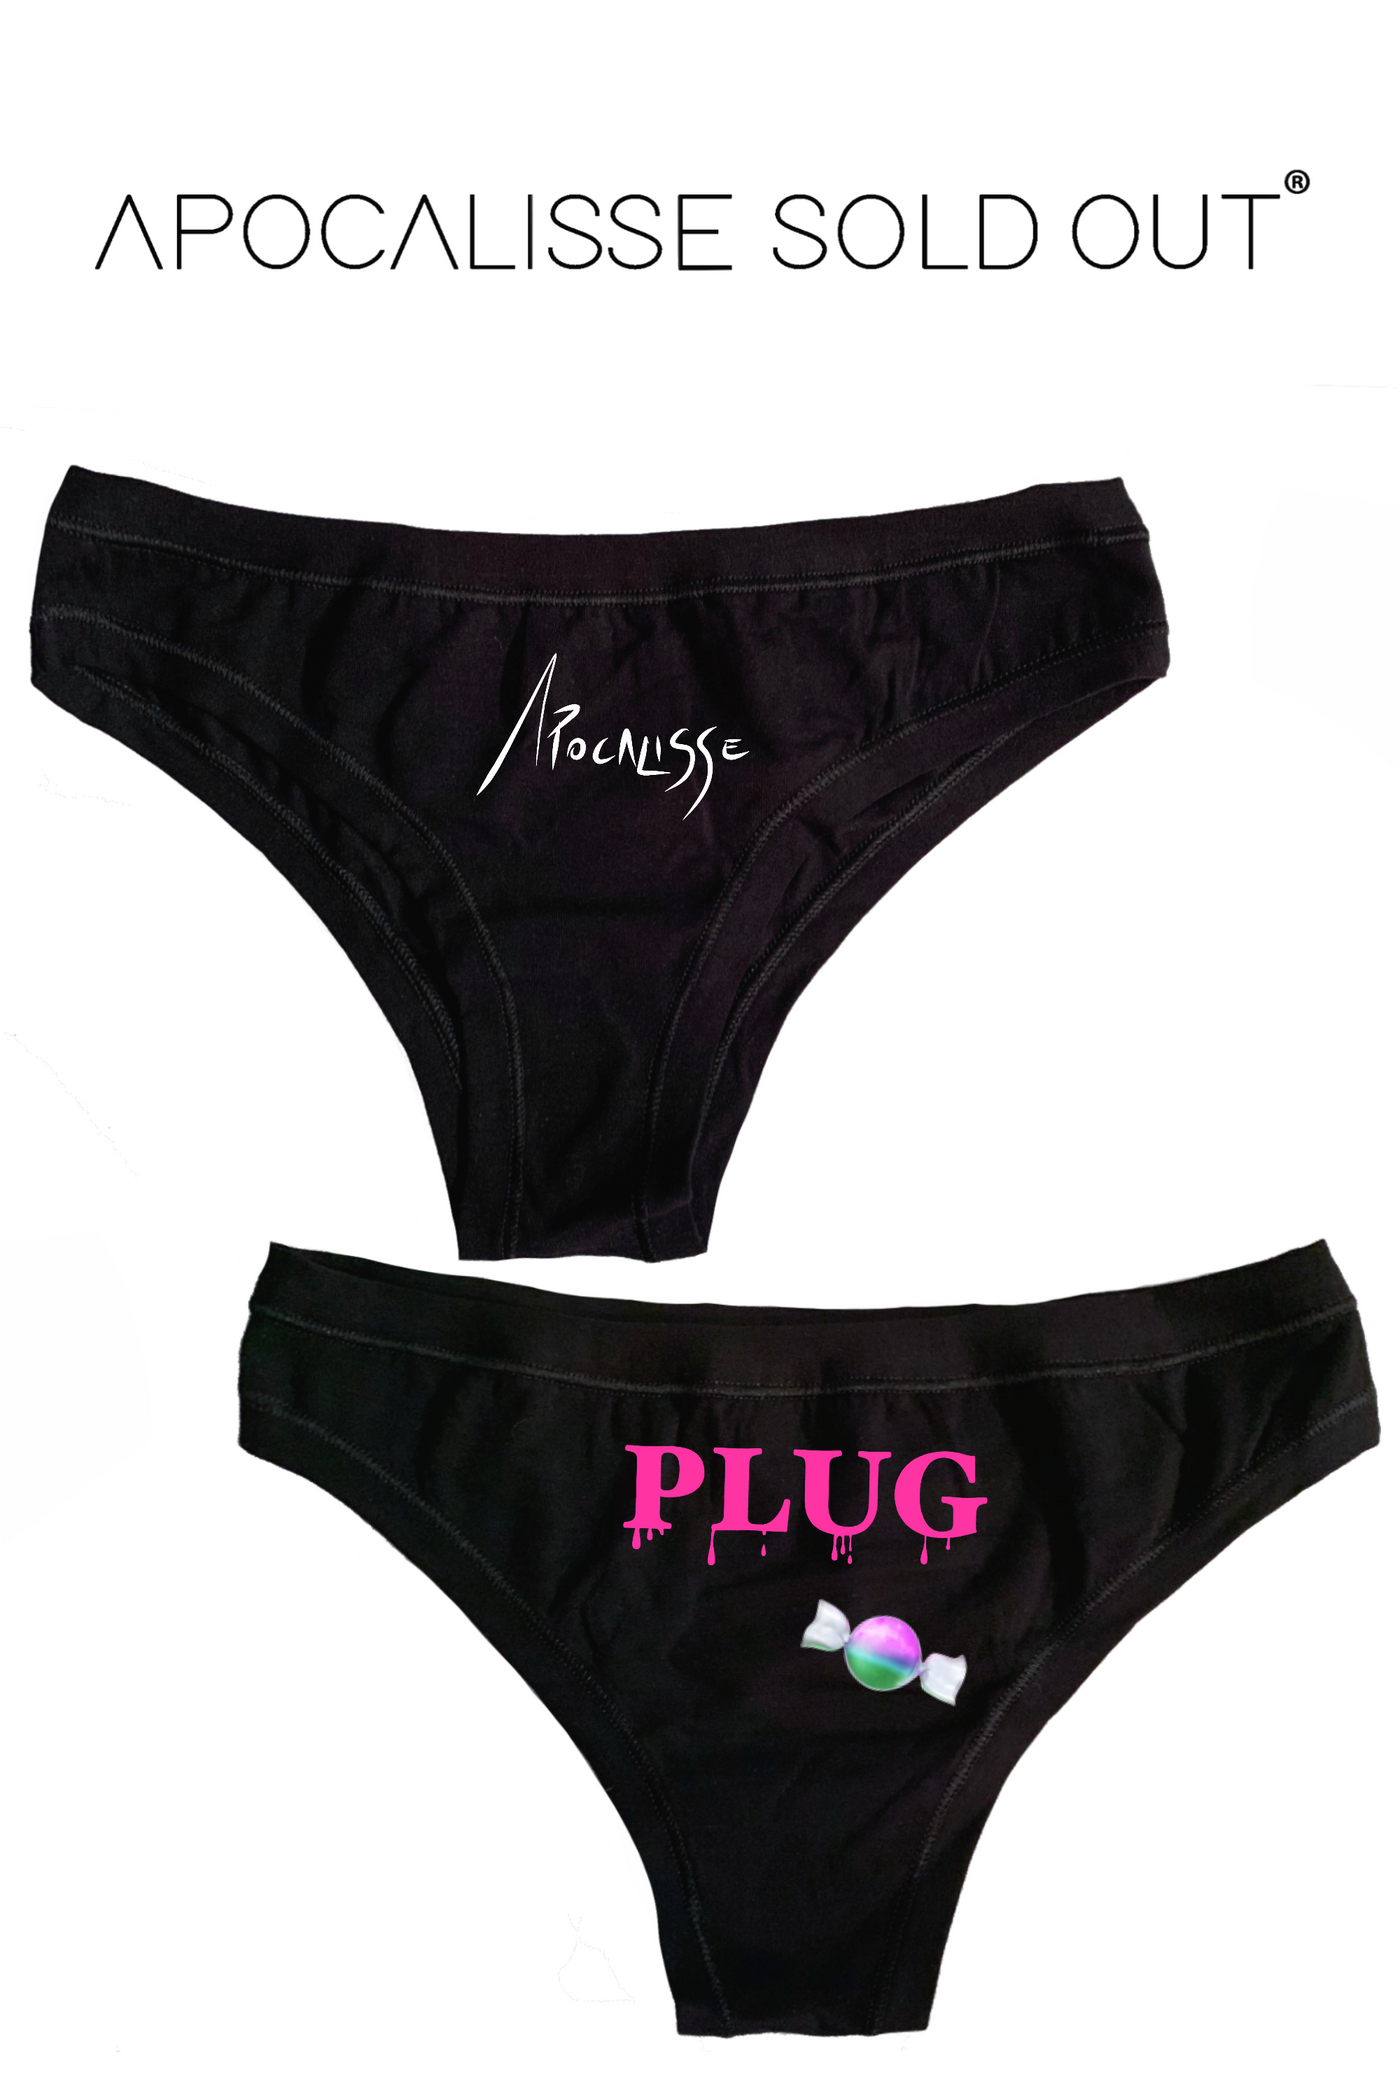 Slip donna PLUG - by apocalissesoldout®